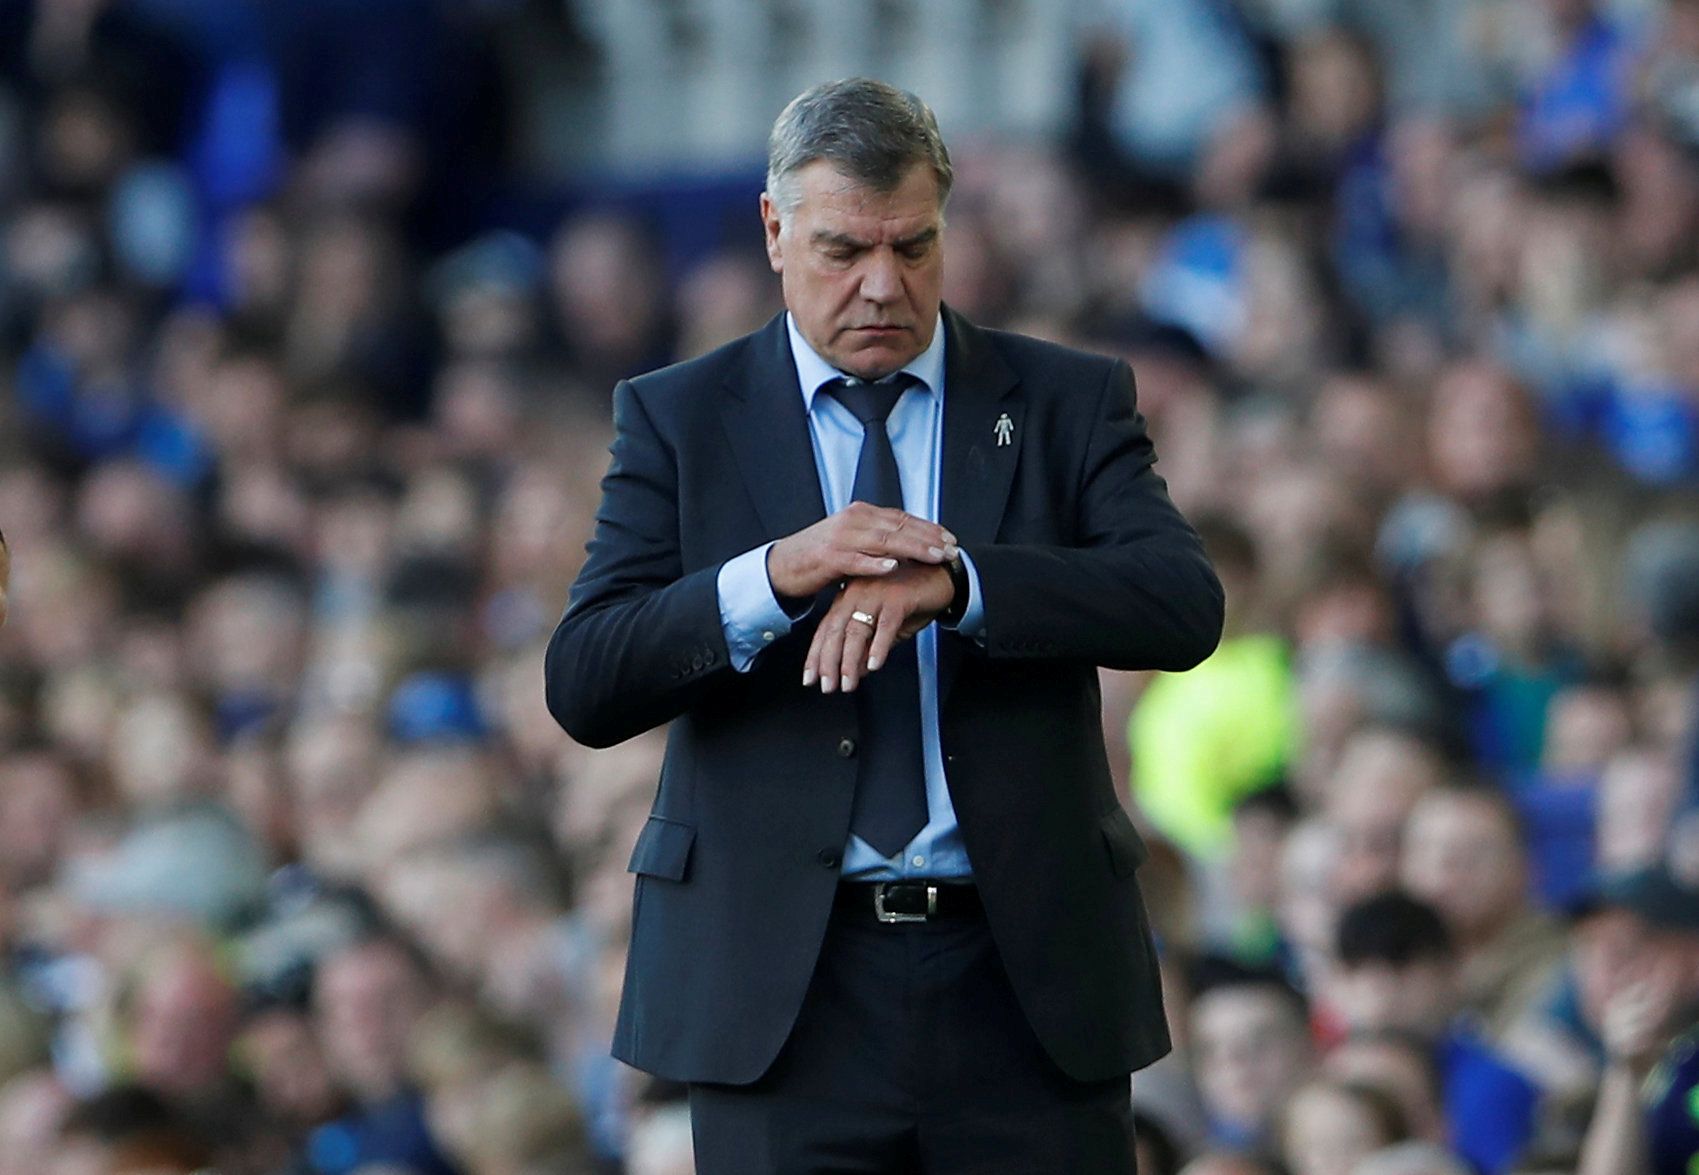 FILE PHOTO: Soccer Football - Premier League - Everton vs Southampton - Goodison Park, Liverpool, Britain - May 5, 2018     Everton manager Sam Allardyce          Action Images via Reuters/Lee Smith/File Photo    EDITORIAL USE ONLY. No use with unauthorized audio, video, data, fixture lists, club/league logos or 